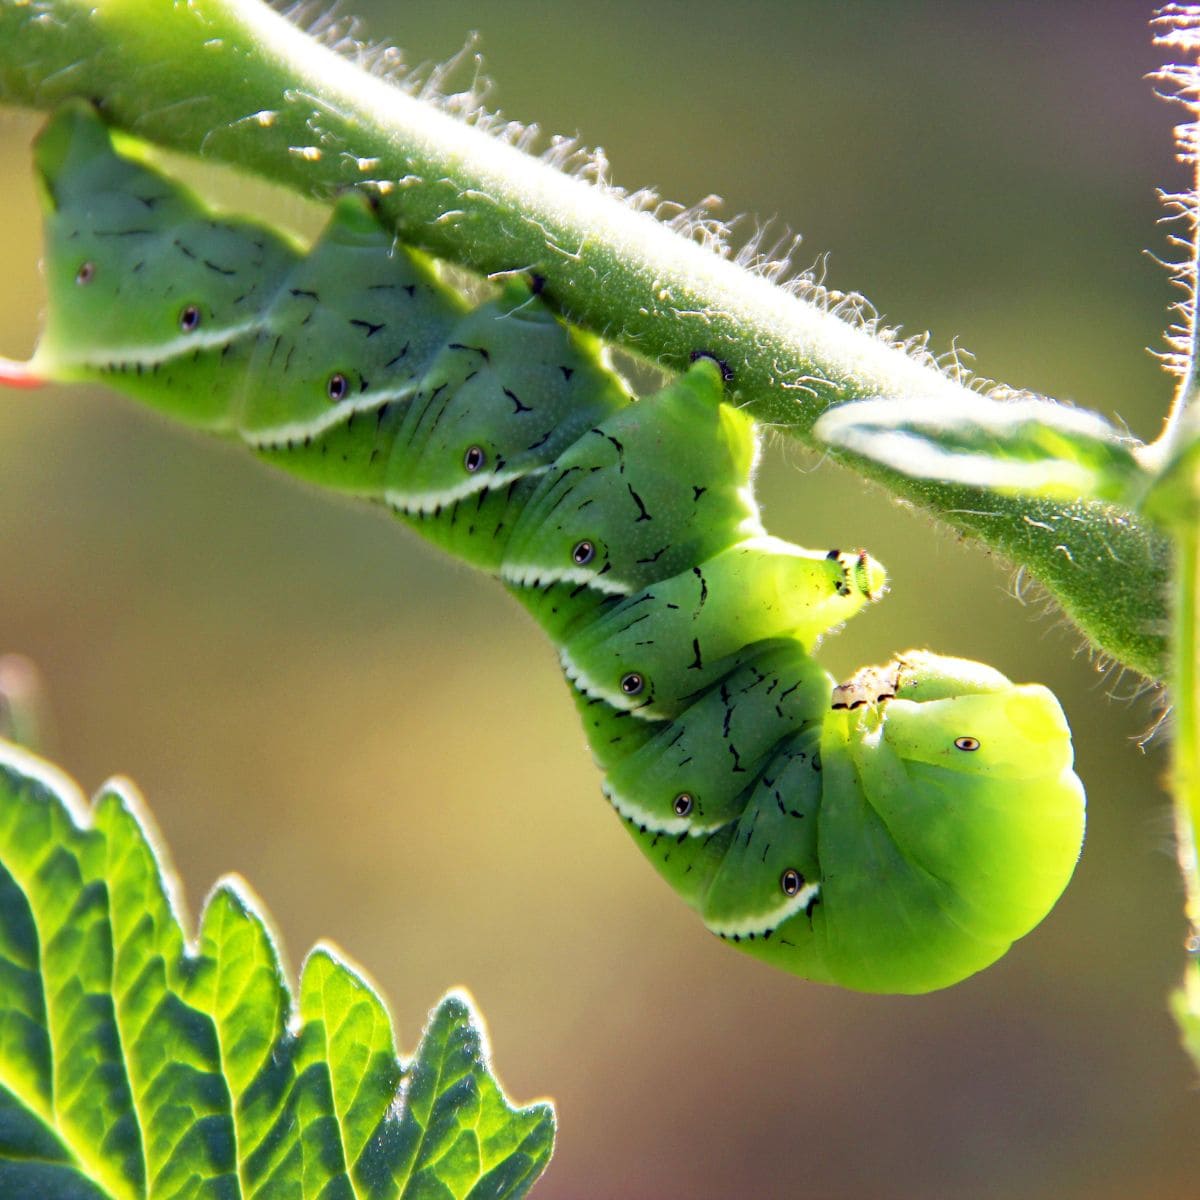 green hornworm upside down on a tomato stem.